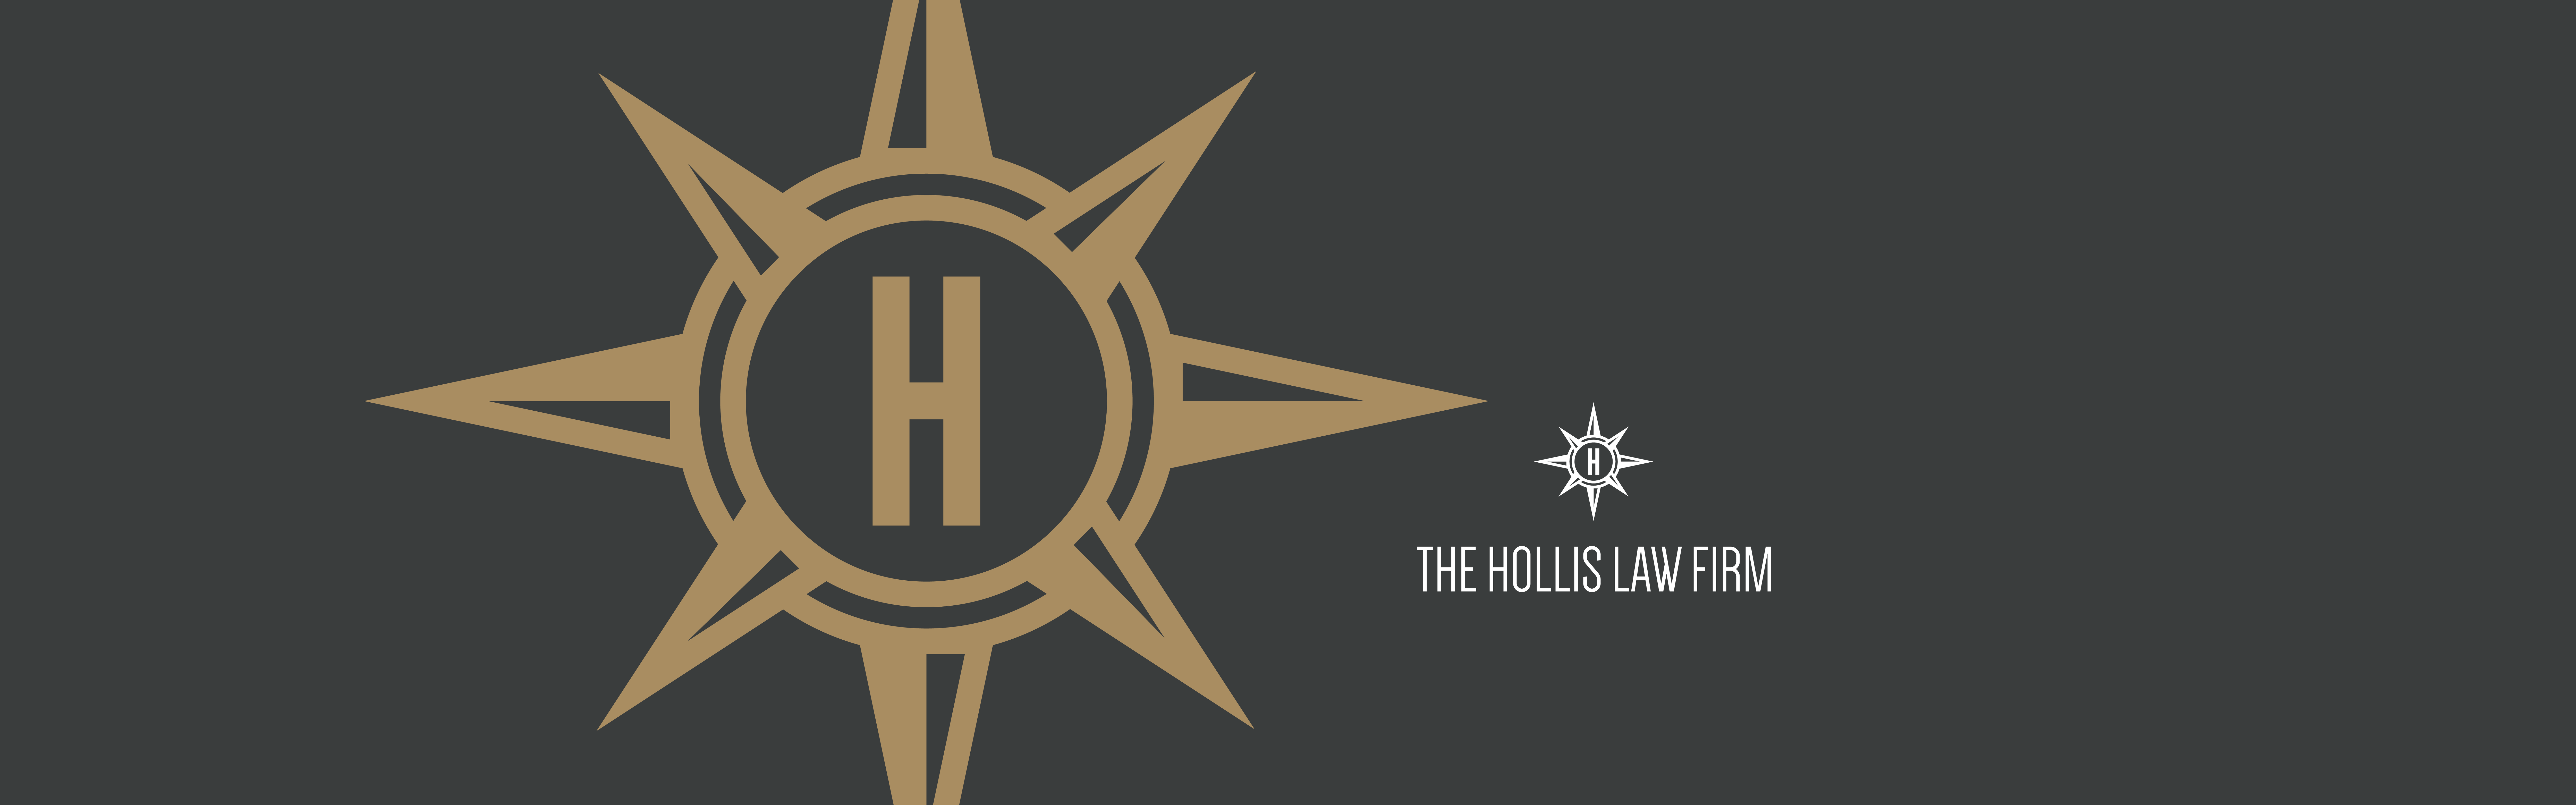 A black background featuring a golden compass-like emblem centered with the letter "h", and text to the right stating "The Hollis Law Firm".